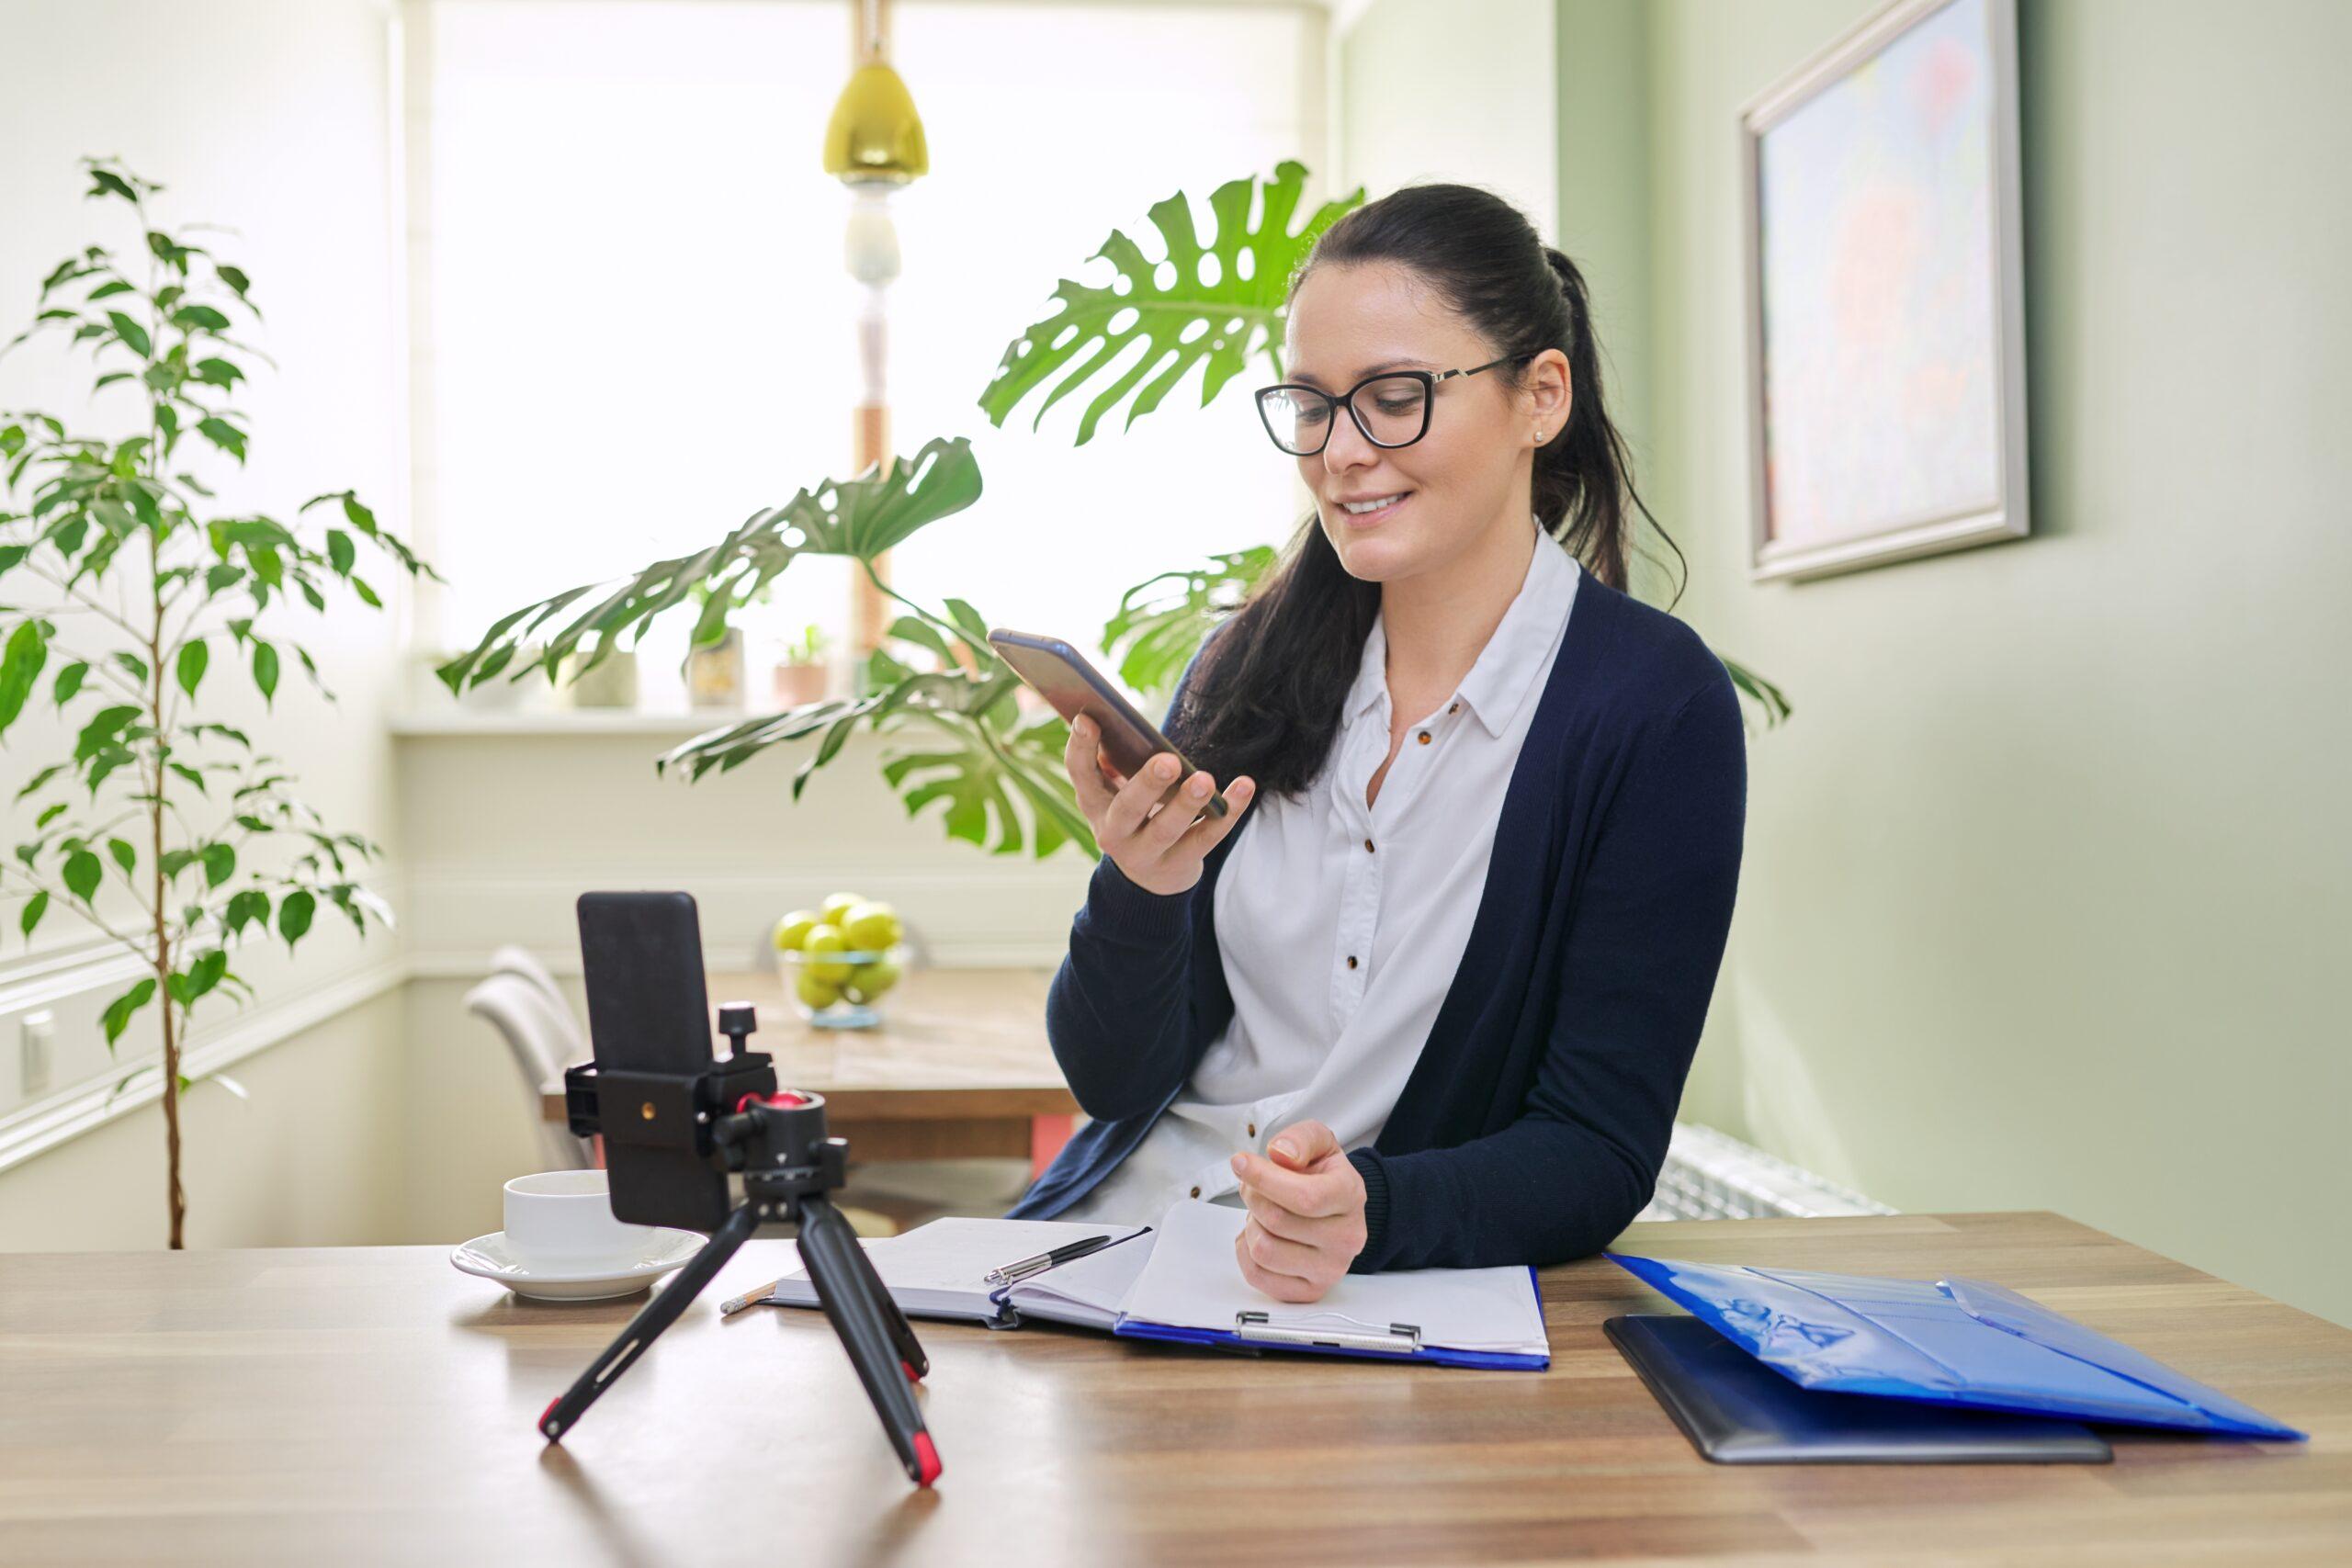 Business woman working remotely using video call